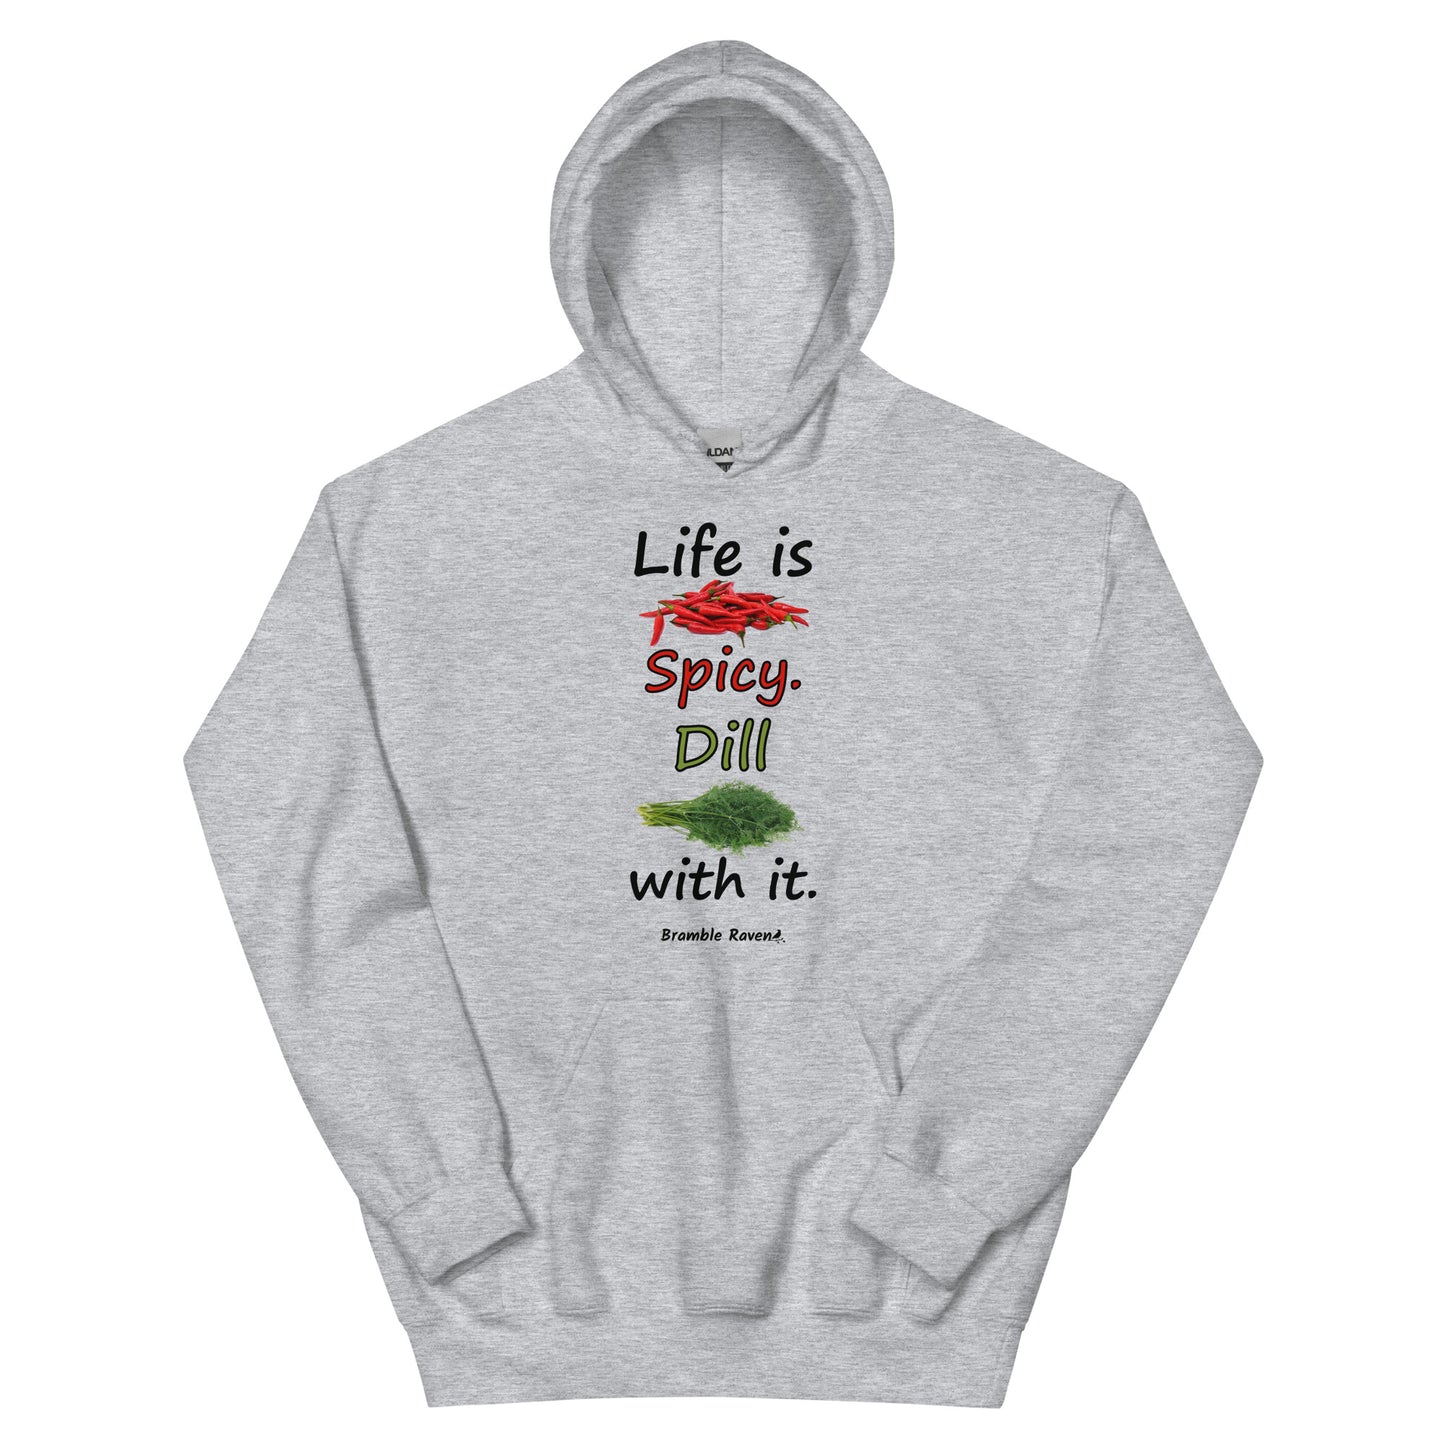 Sport grey colored unisex heavy blend hoodie.  Double lined hood, matching drawcord, front pouch pocket. Rib knit cuffs and waistband. Features text and image: Life is spicy. Dill with it. 